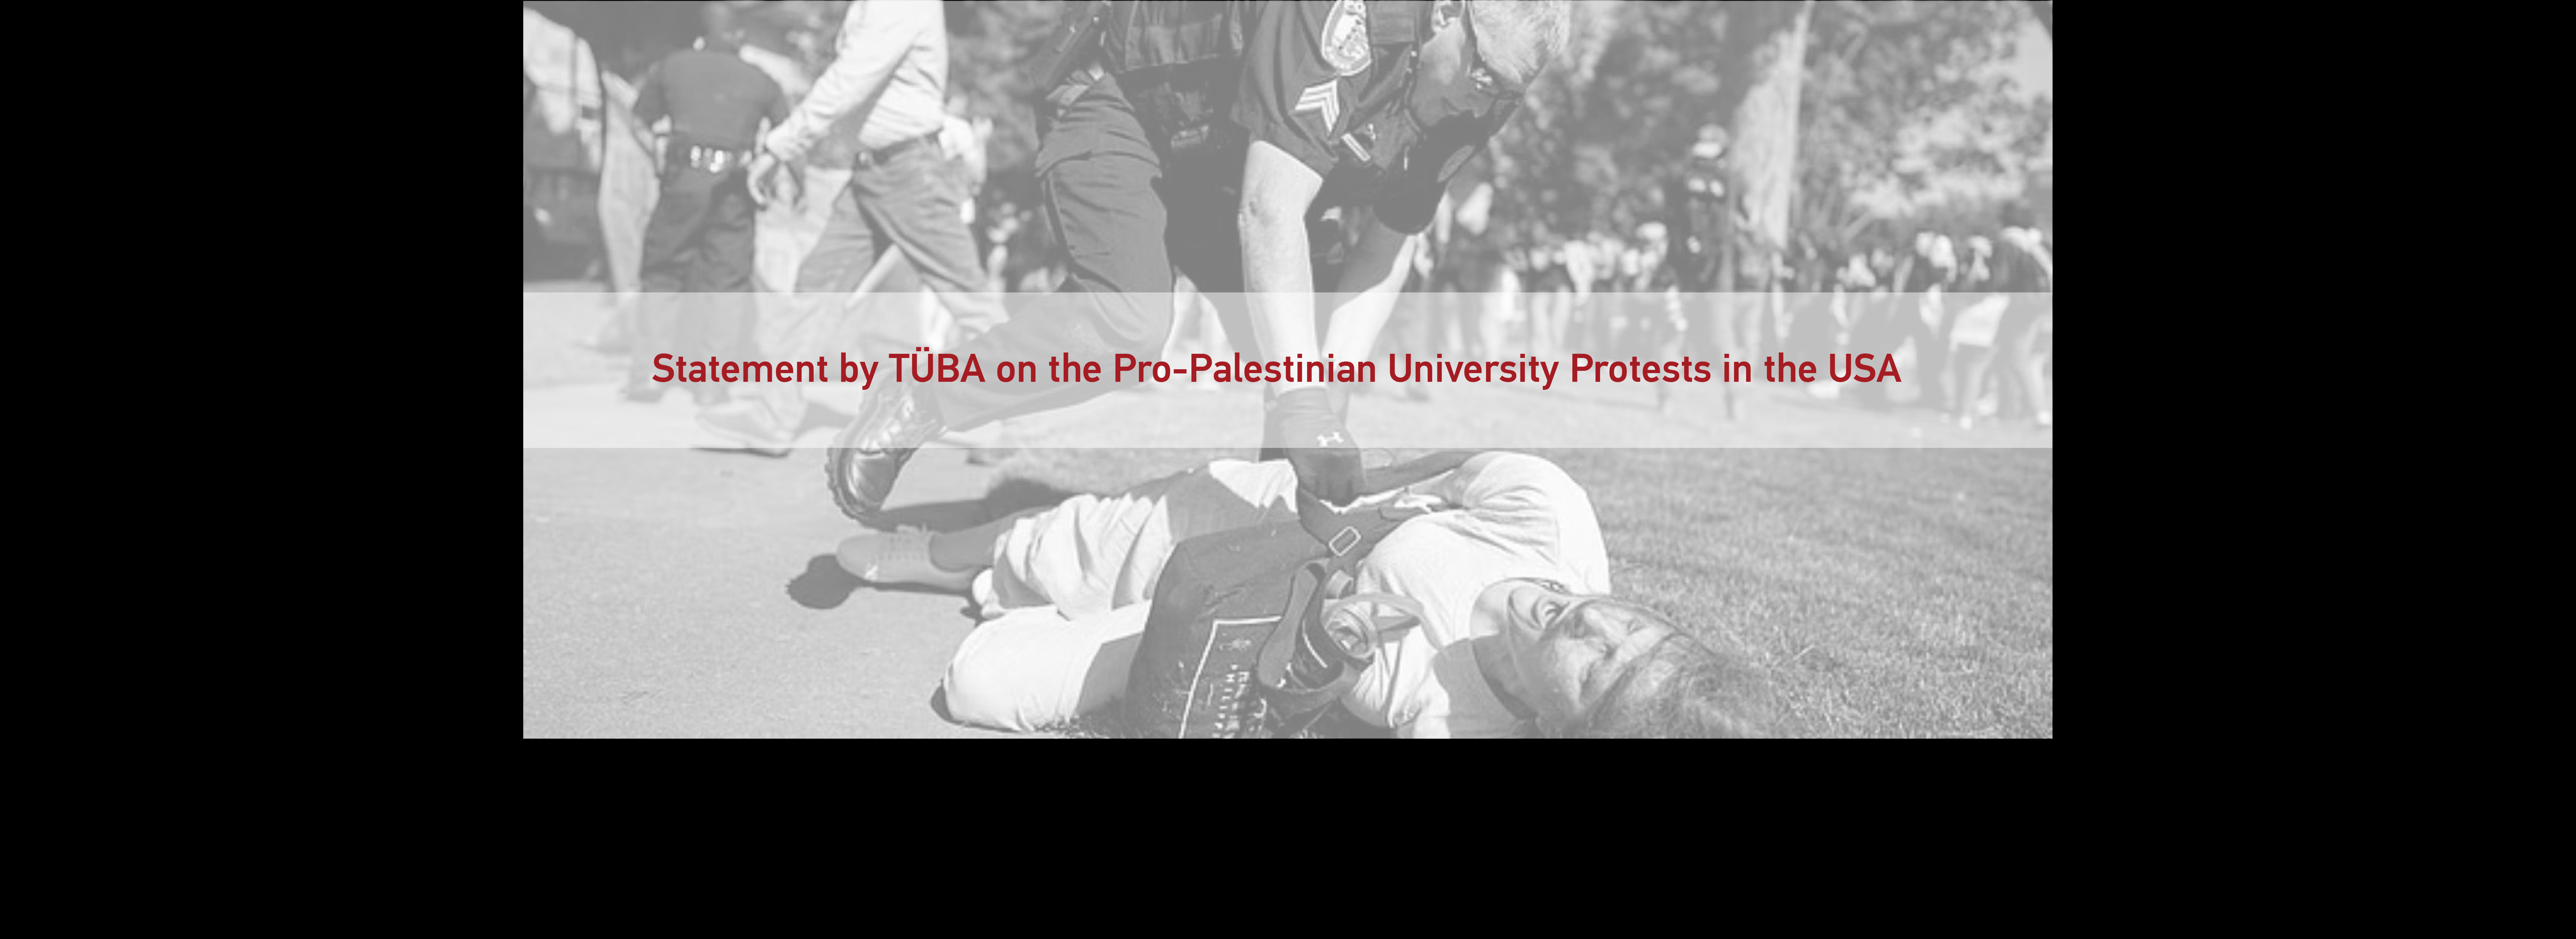 Statement by TÜBA on the Pro-Palestinian University Protests in the USA